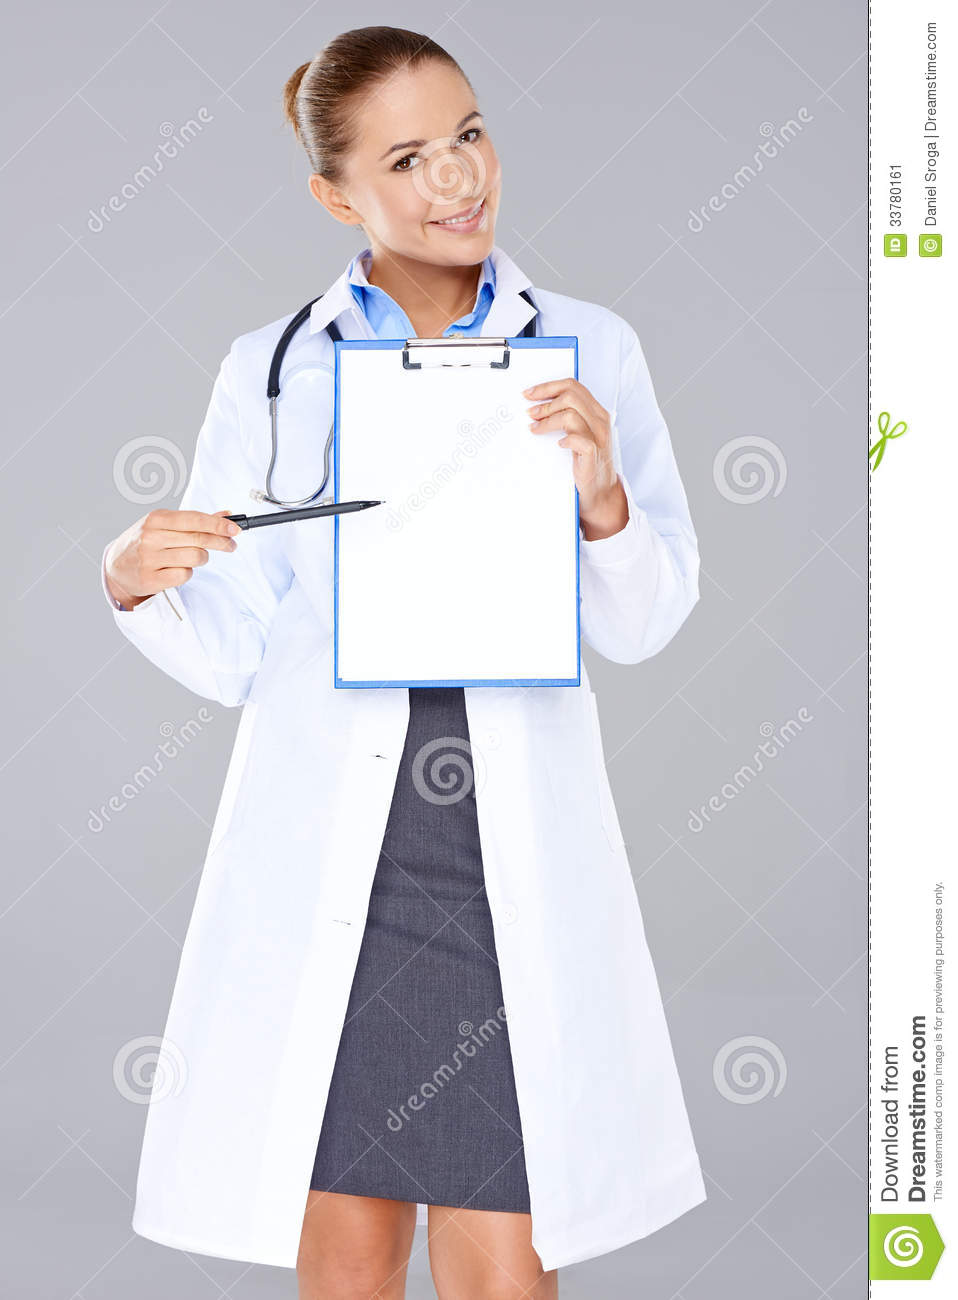 Attractive Female Doctor In A Lab Coat Displaying A Blank Clipboard In